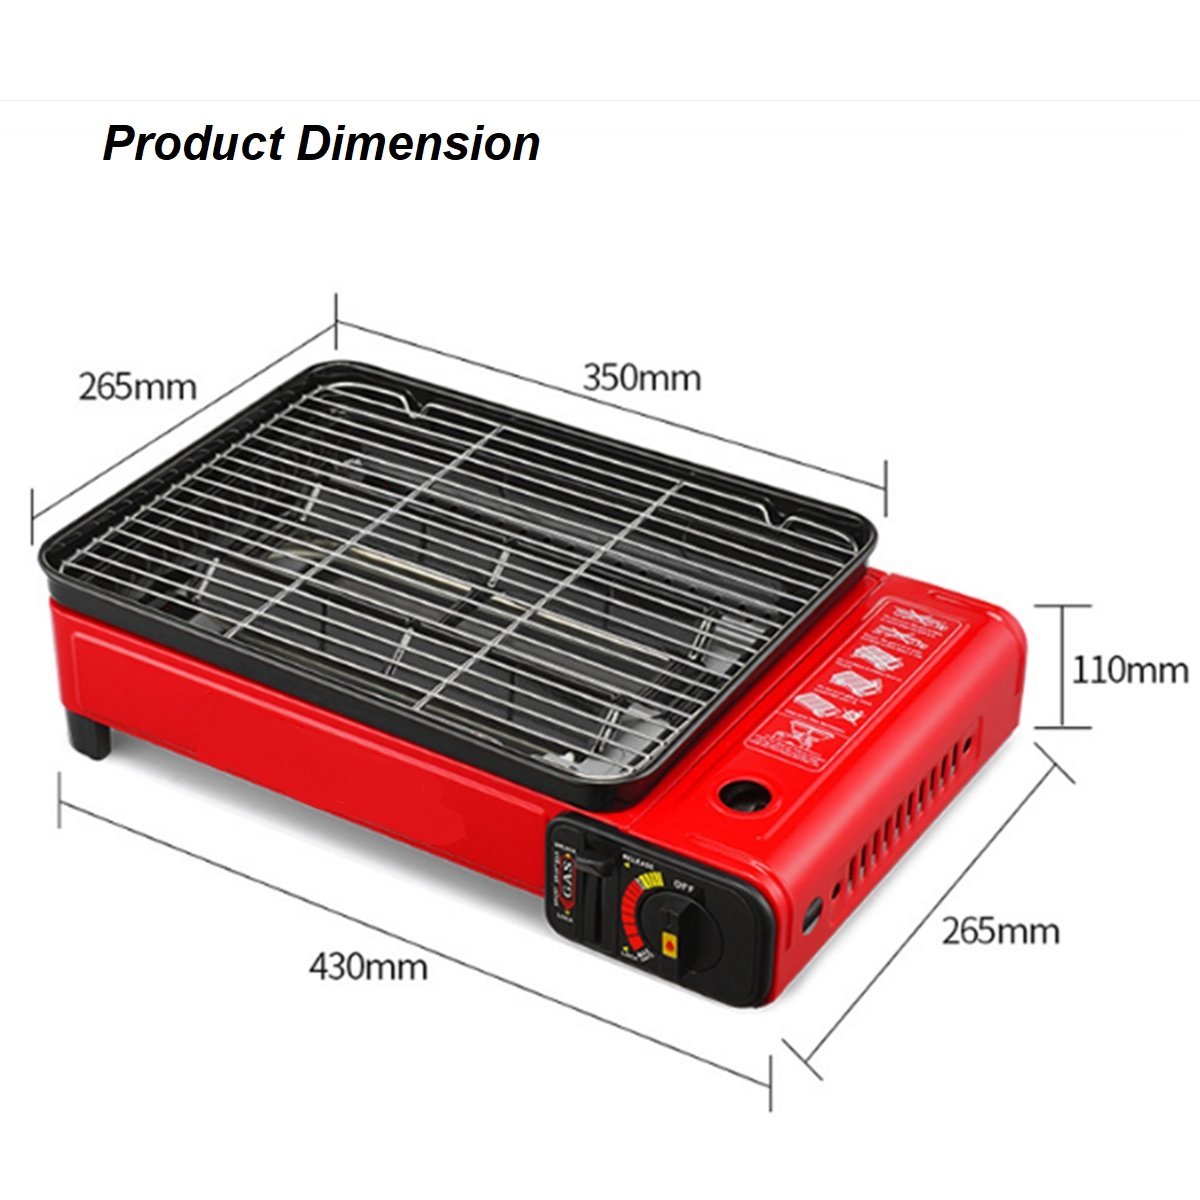 Portable Gas Stove Burner Butane BBQ Camping Gas Cooker With Non Stick Plate Orange with Fish Pan and Lid - SILBERSHELL